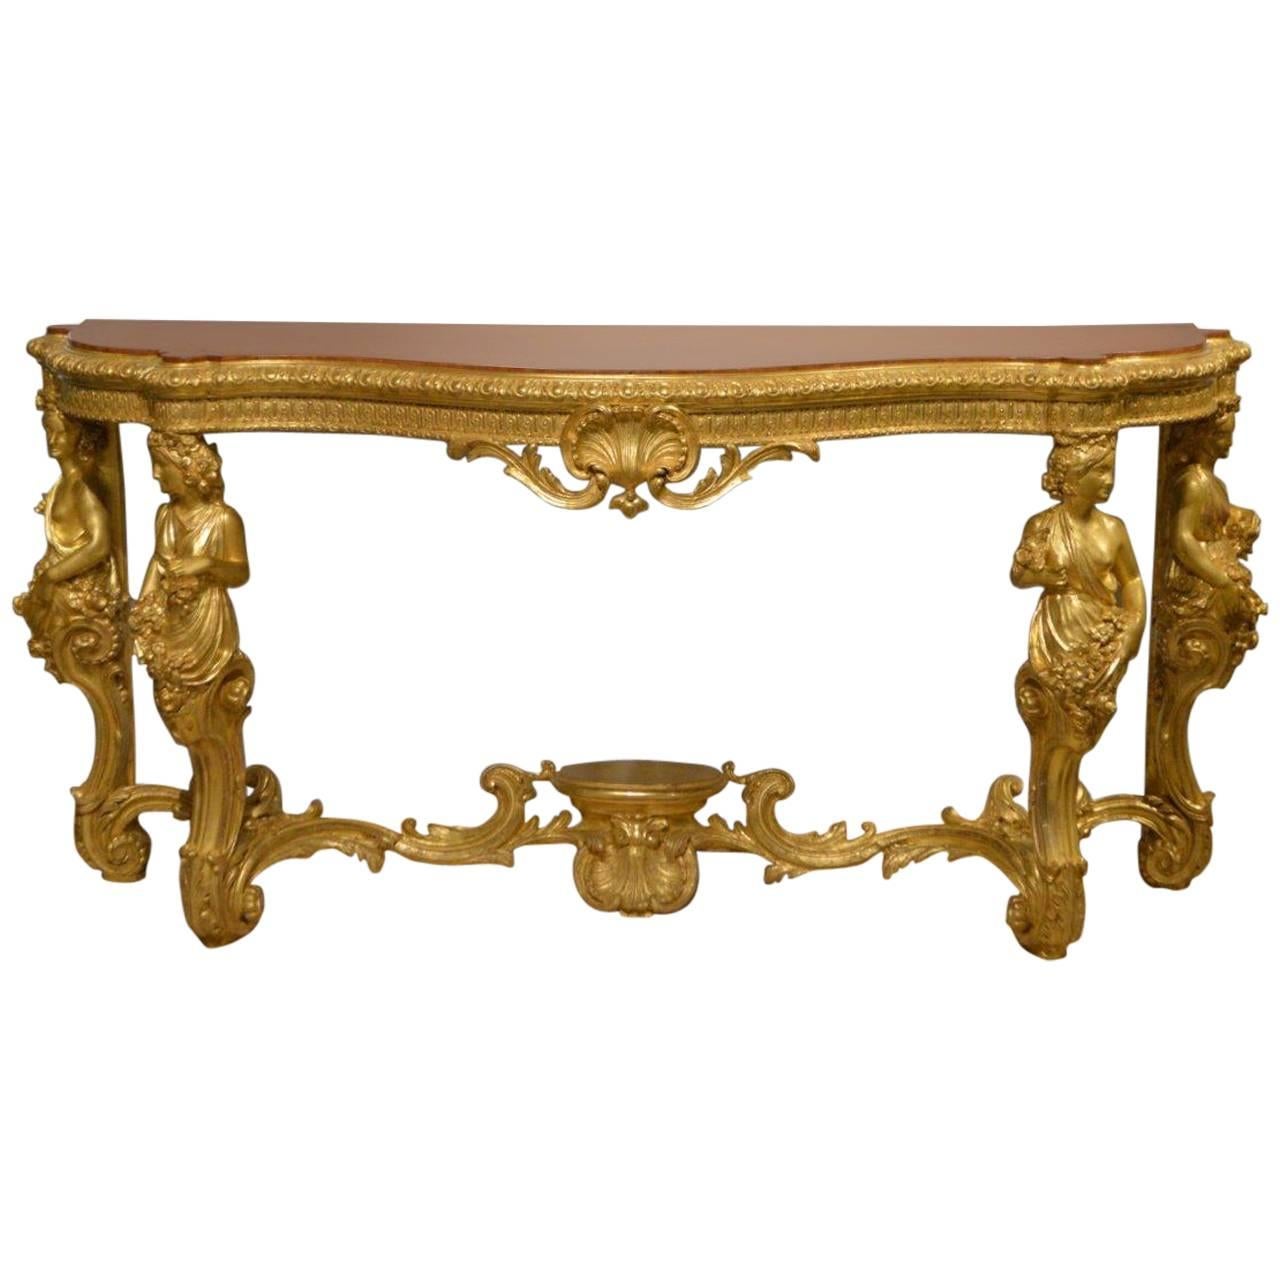 Superb 19th Century French Baroque Style Gilt-Wood Serpentine Console Table